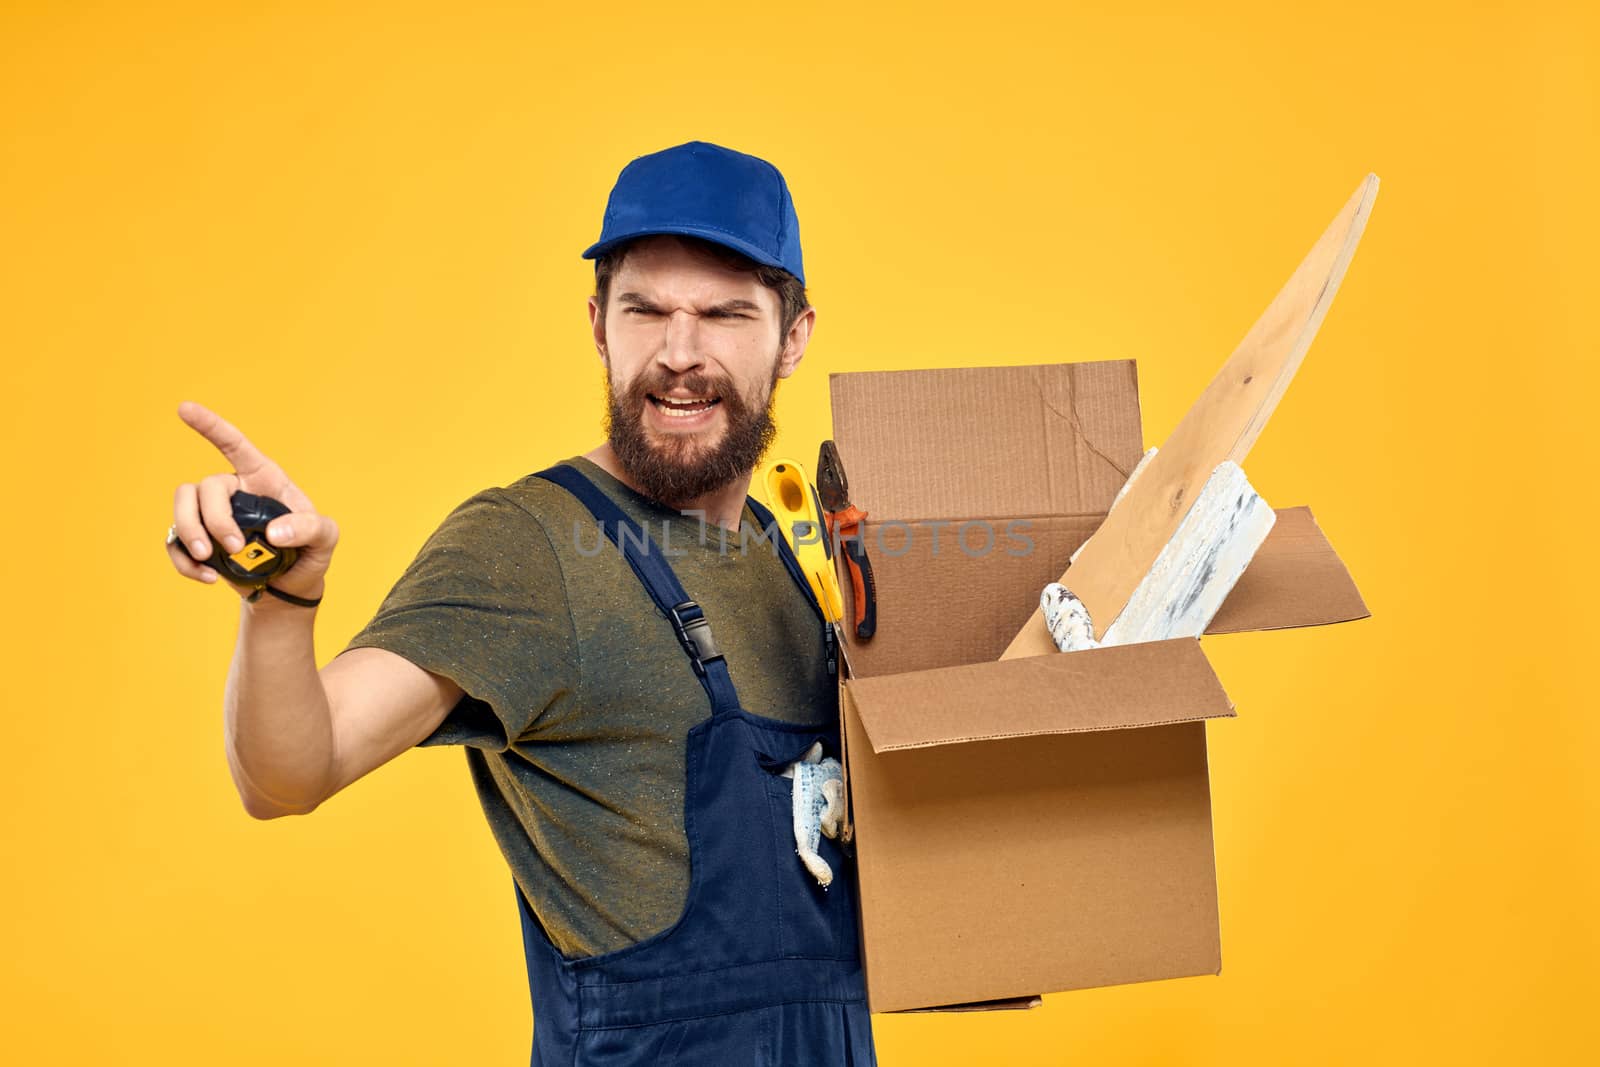 A man in a working form a box with loading tools yellow background. High quality photo